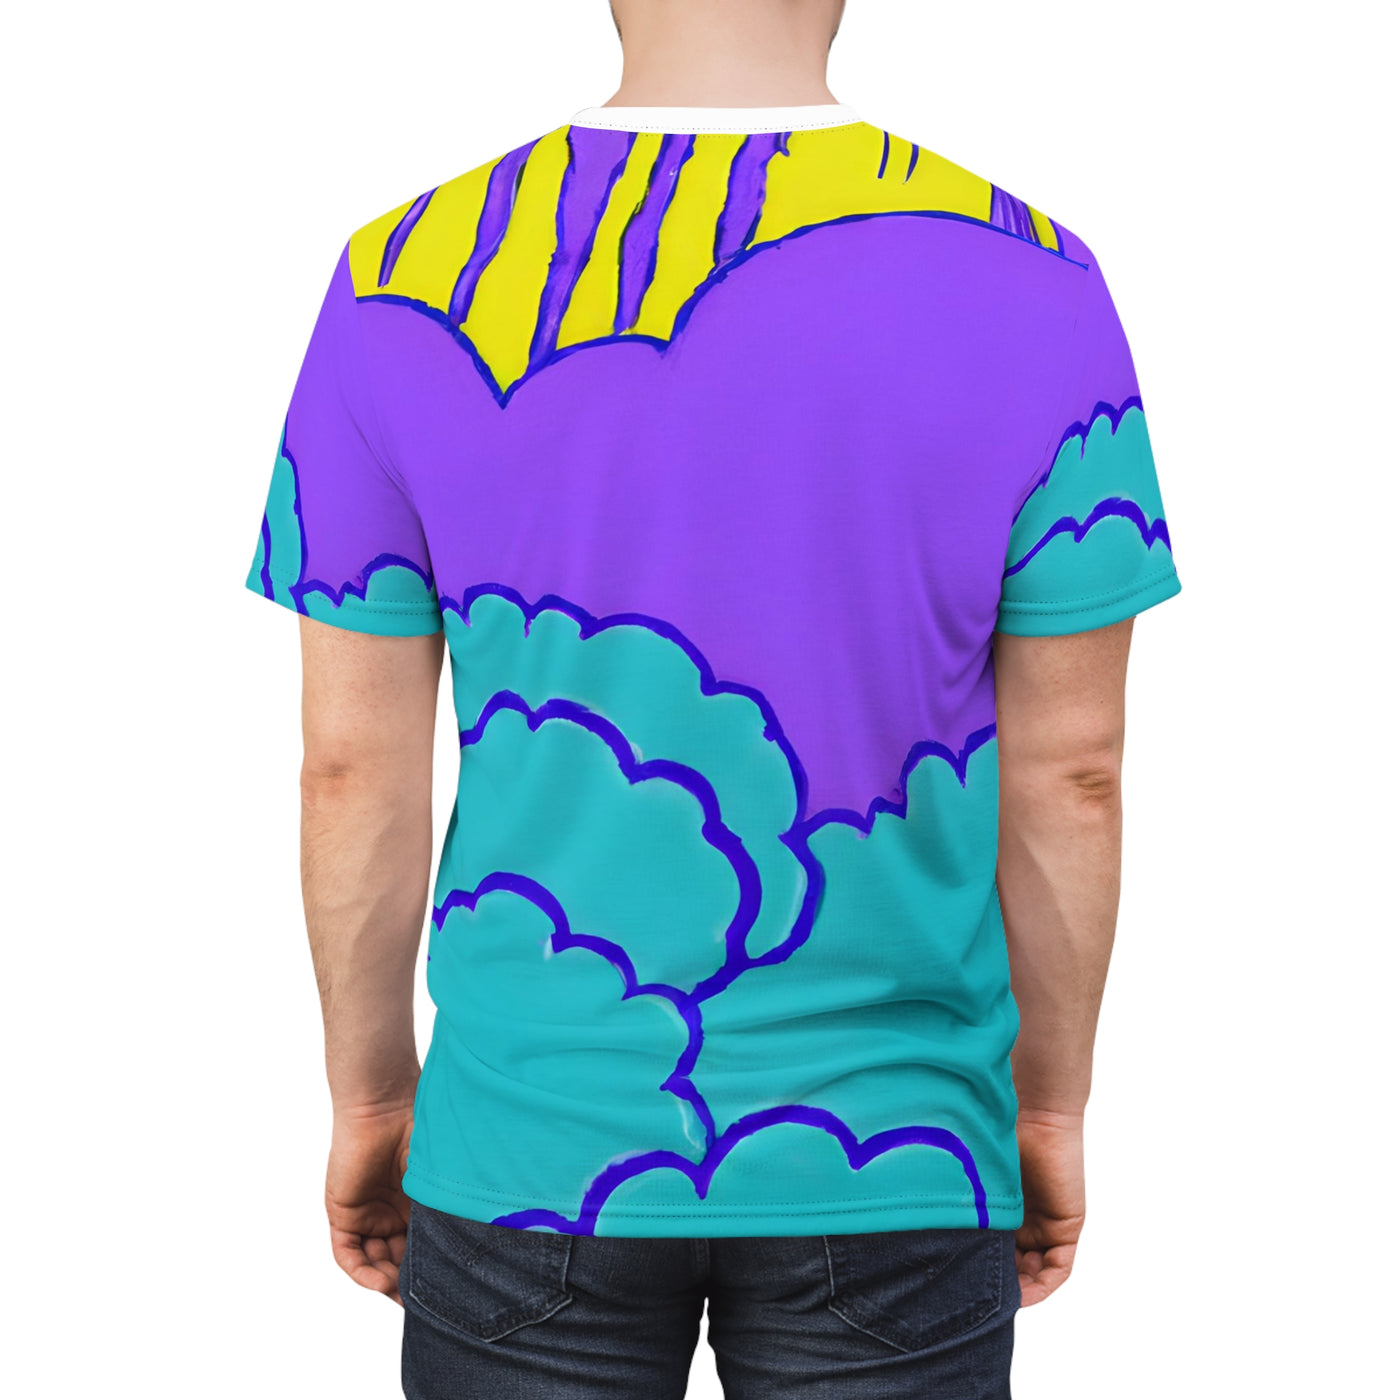 "Amazing Clouds of Colorful Joy!" Unisex Cut & Sew Tee